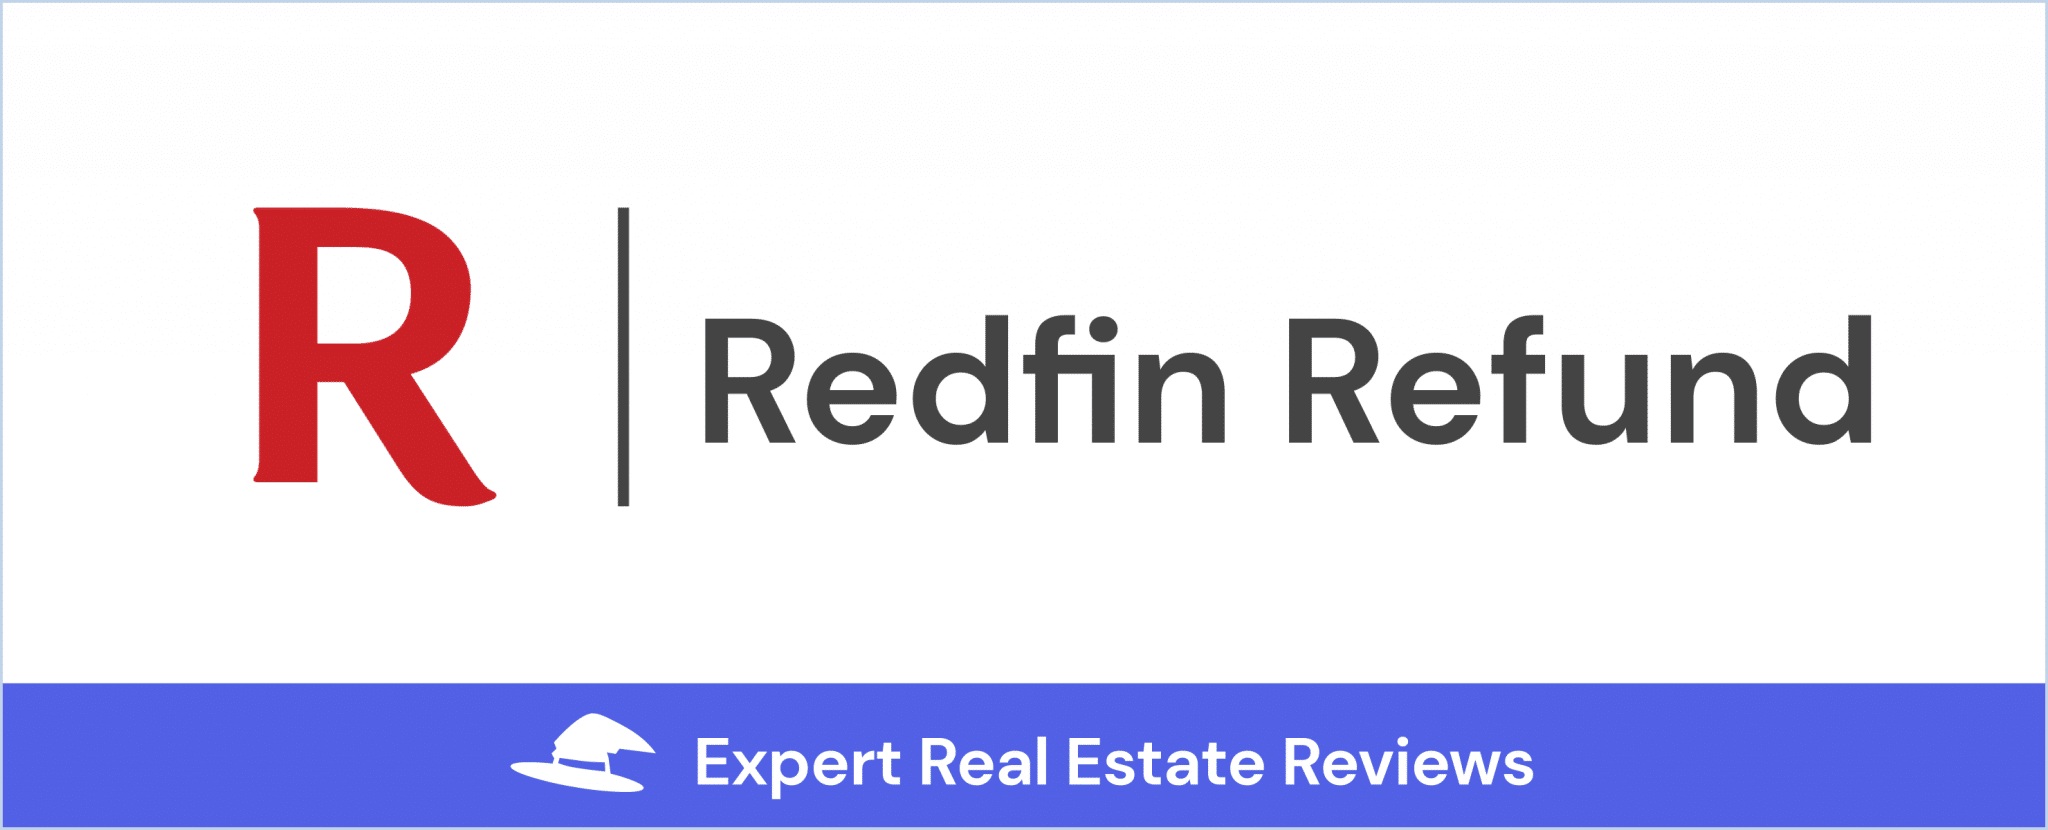 Redfin written in red block letters on a white background